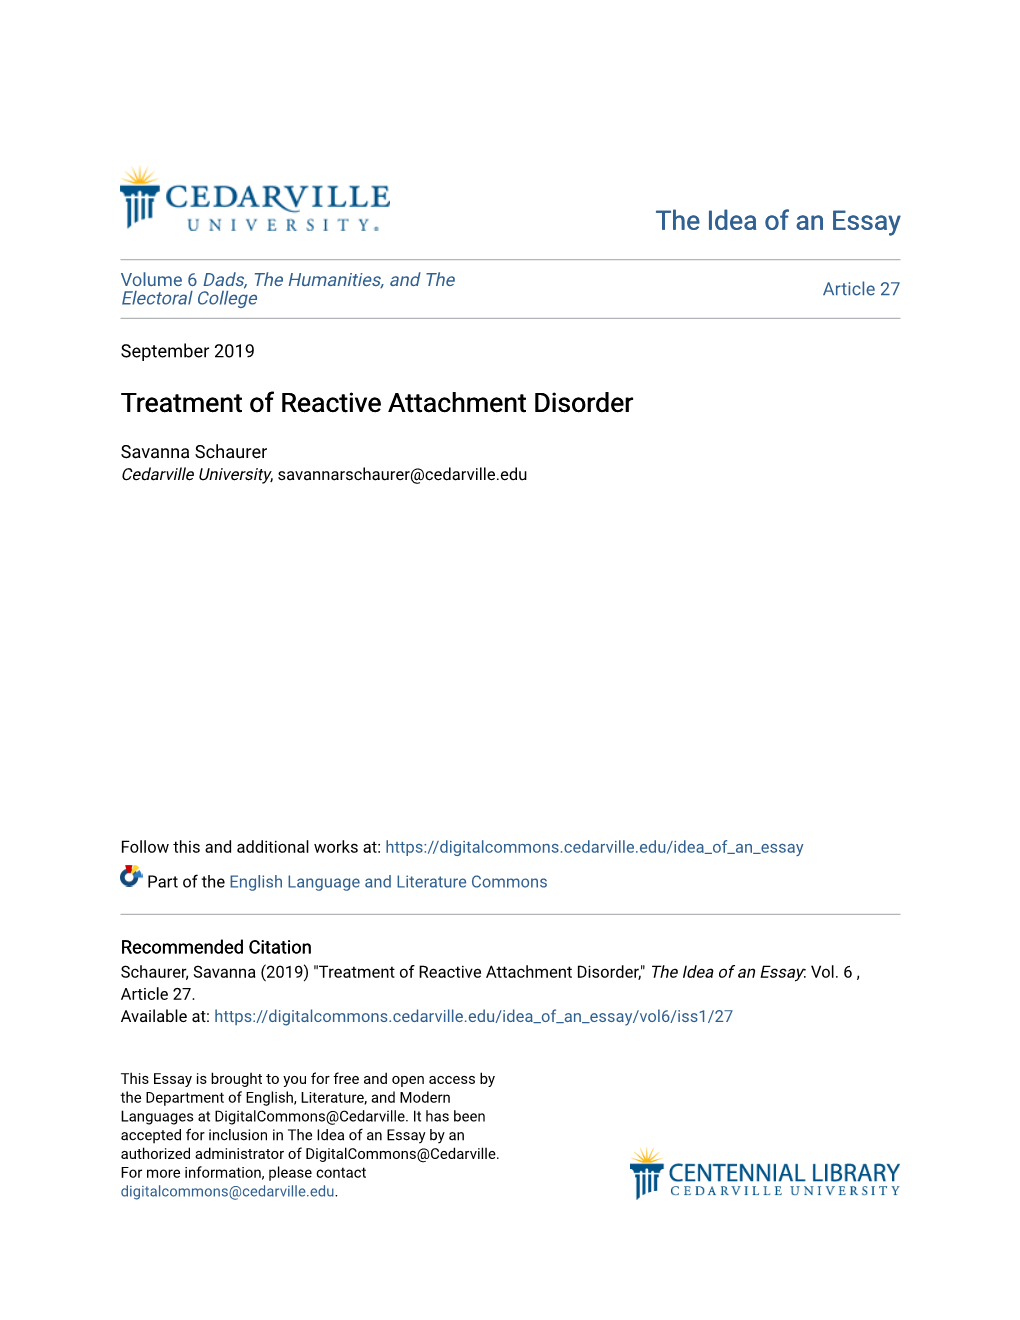 Treatment of Reactive Attachment Disorder